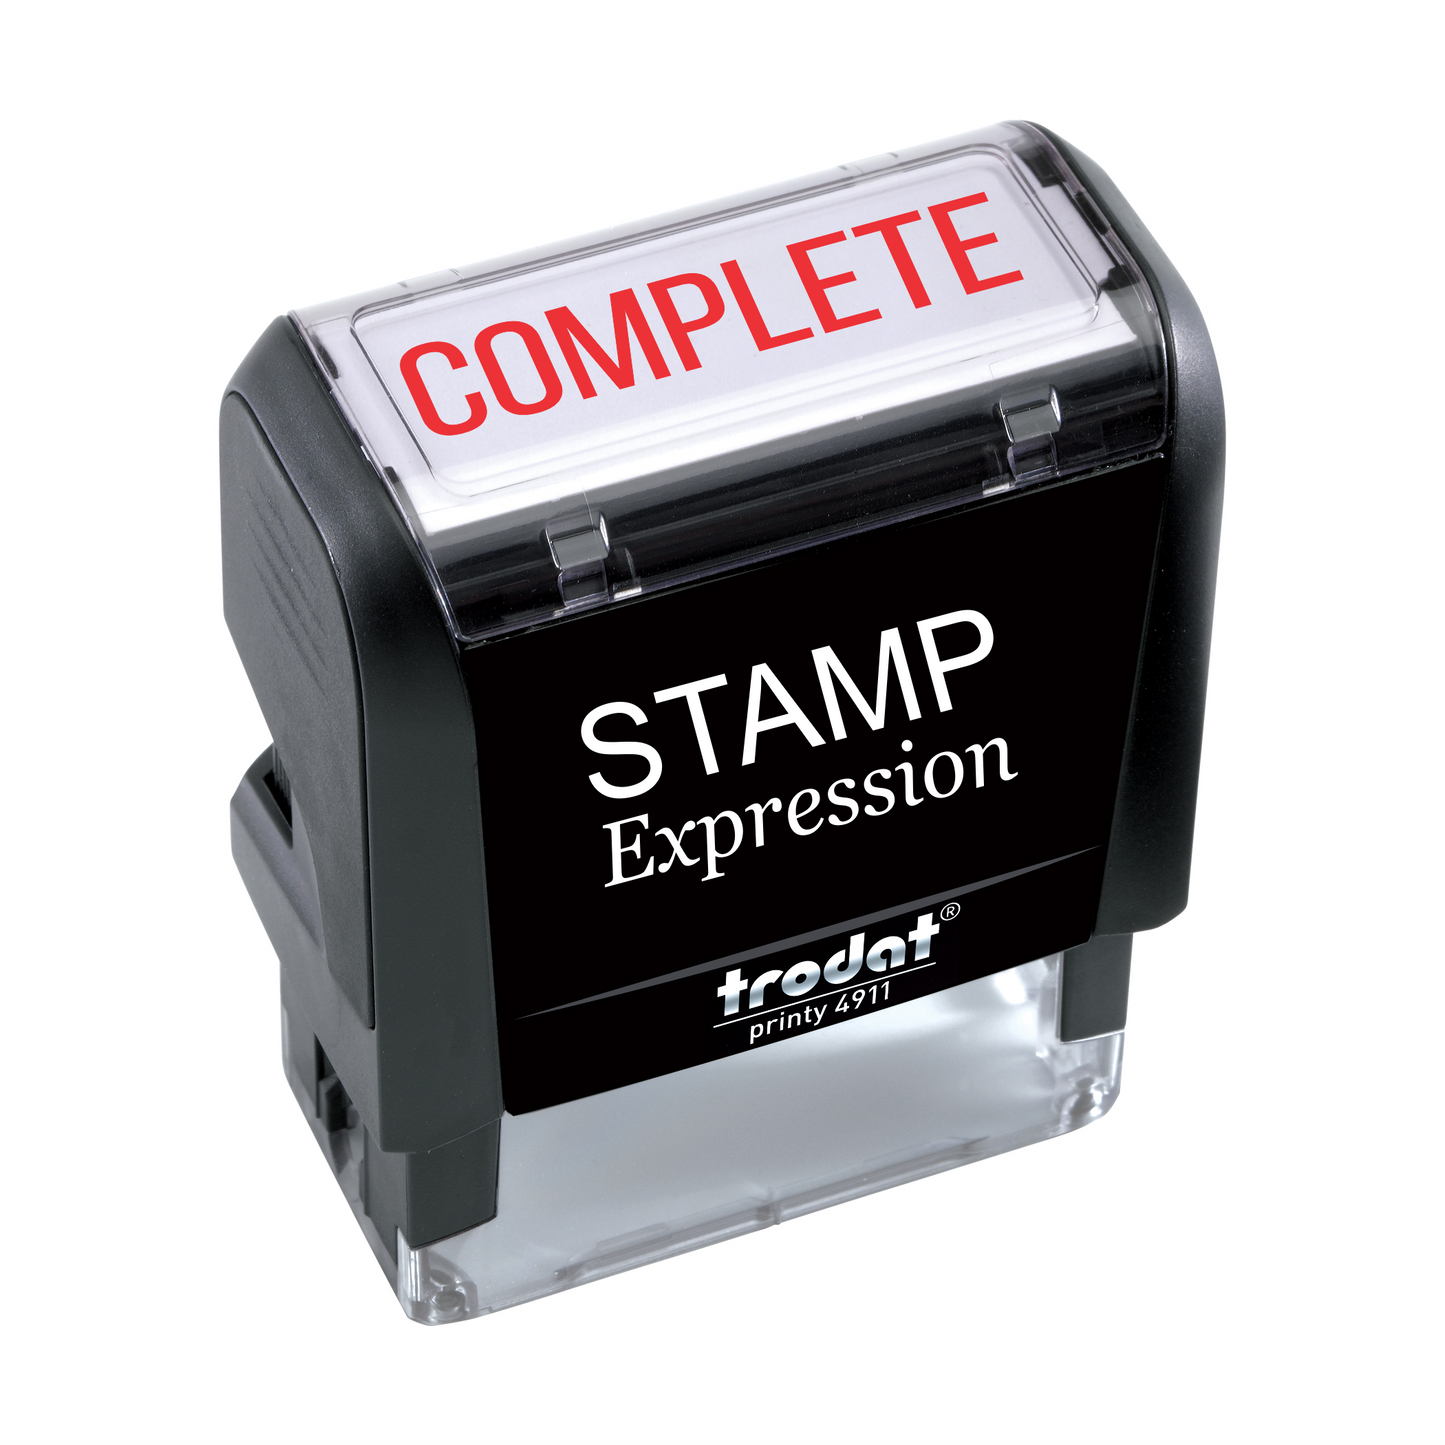 Complete Office Self Inking Rubber Stamp (SH-5237)